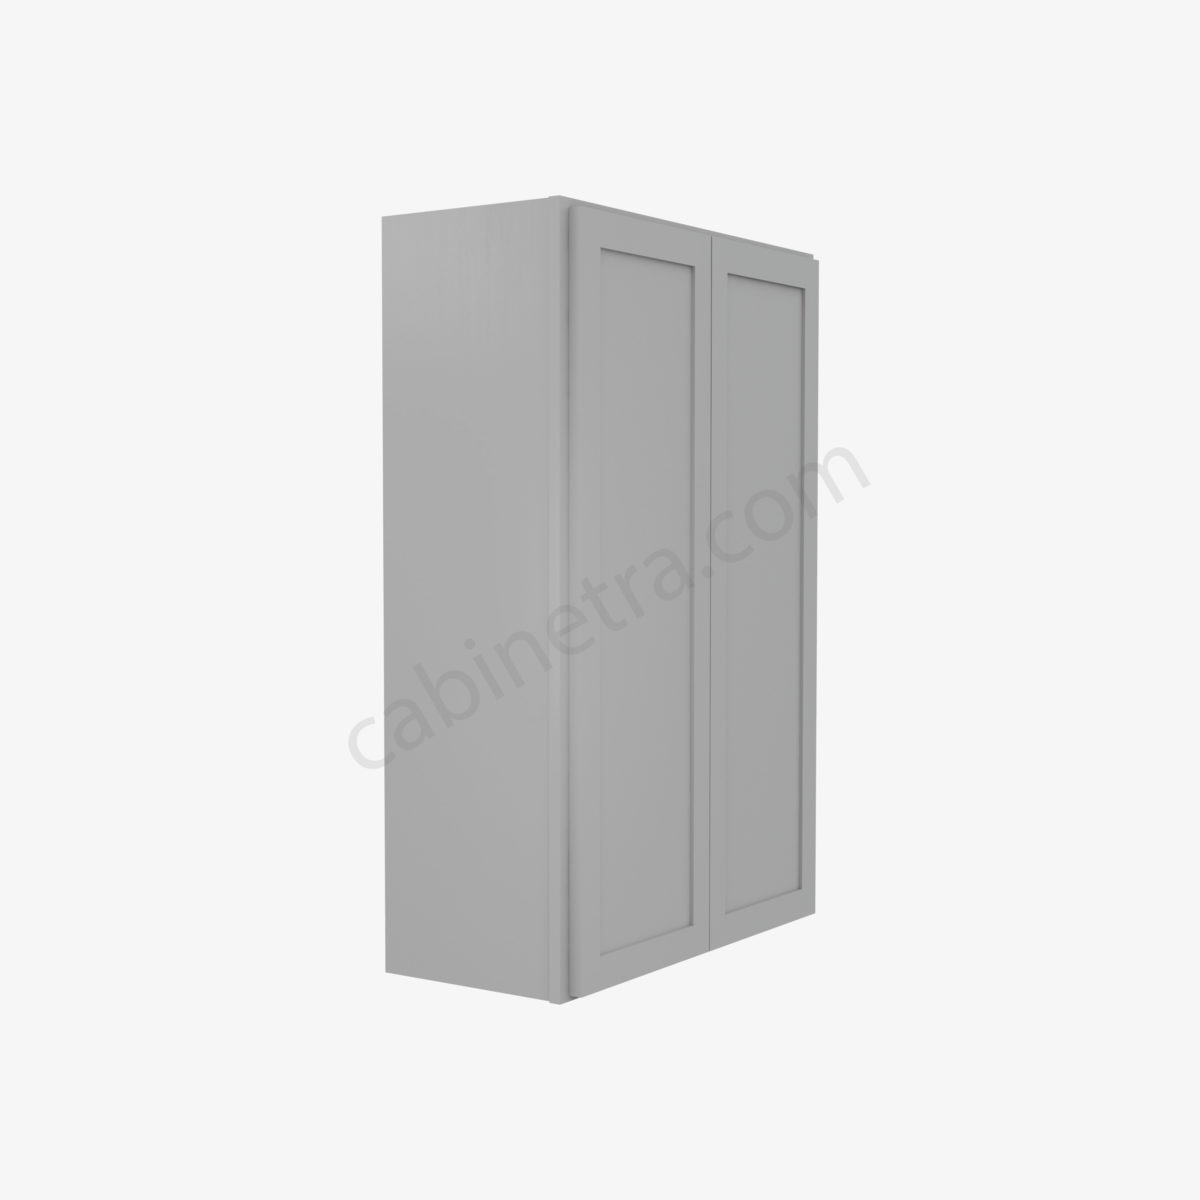 AB W2742B 4 Forevermark Lait Gray Shaker Cabinetra scaled